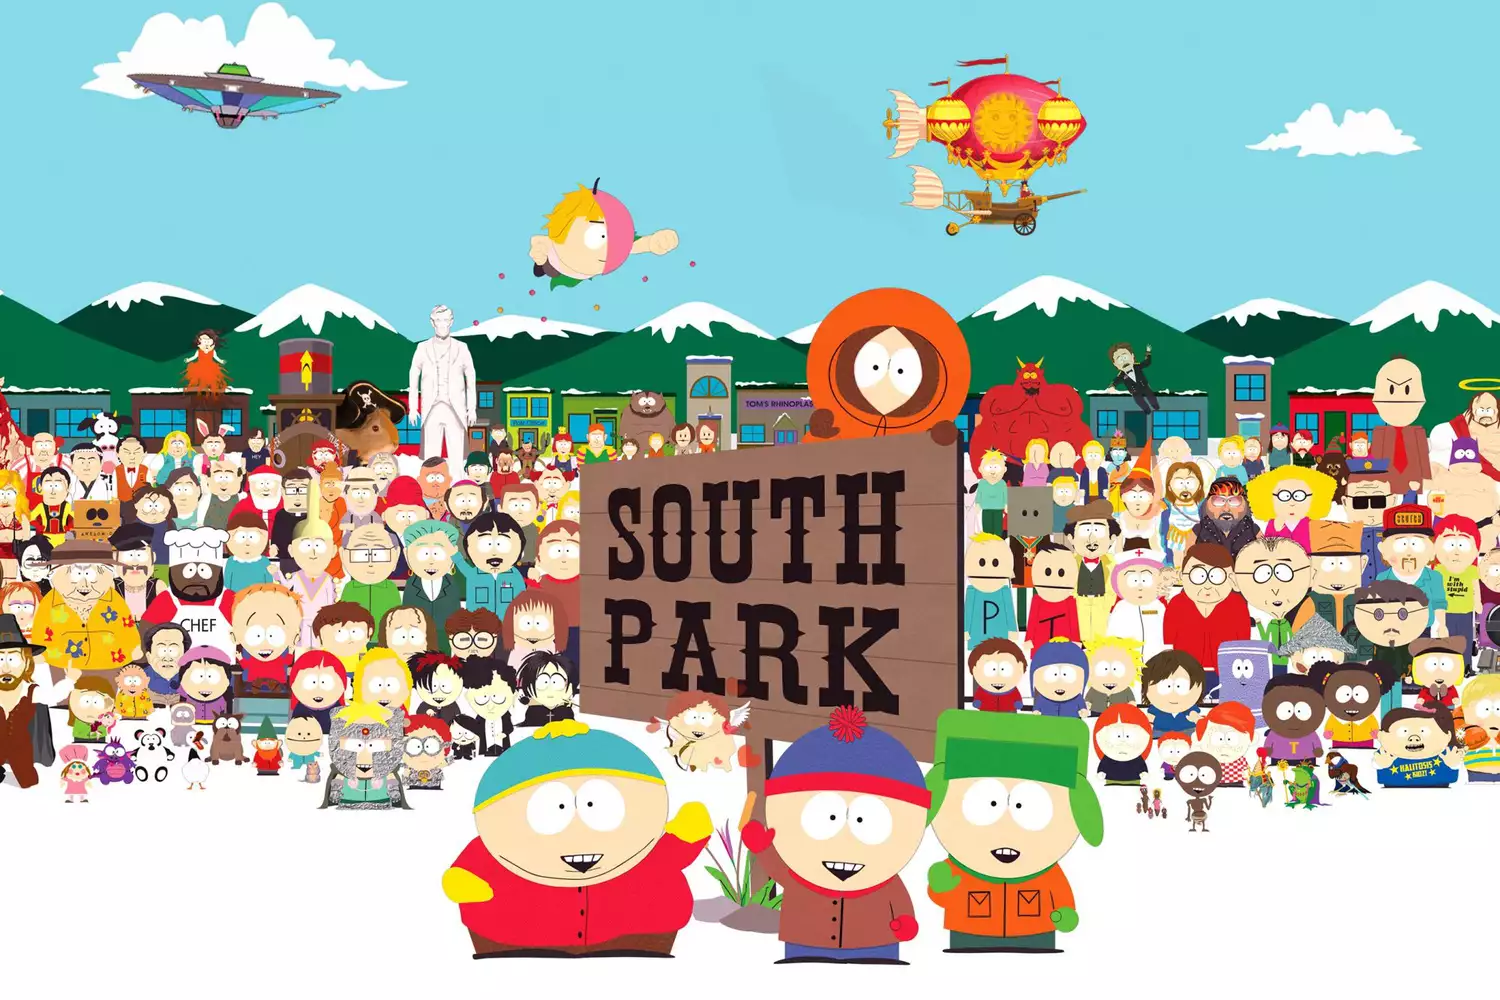 South Park Is Not Suitable for Children